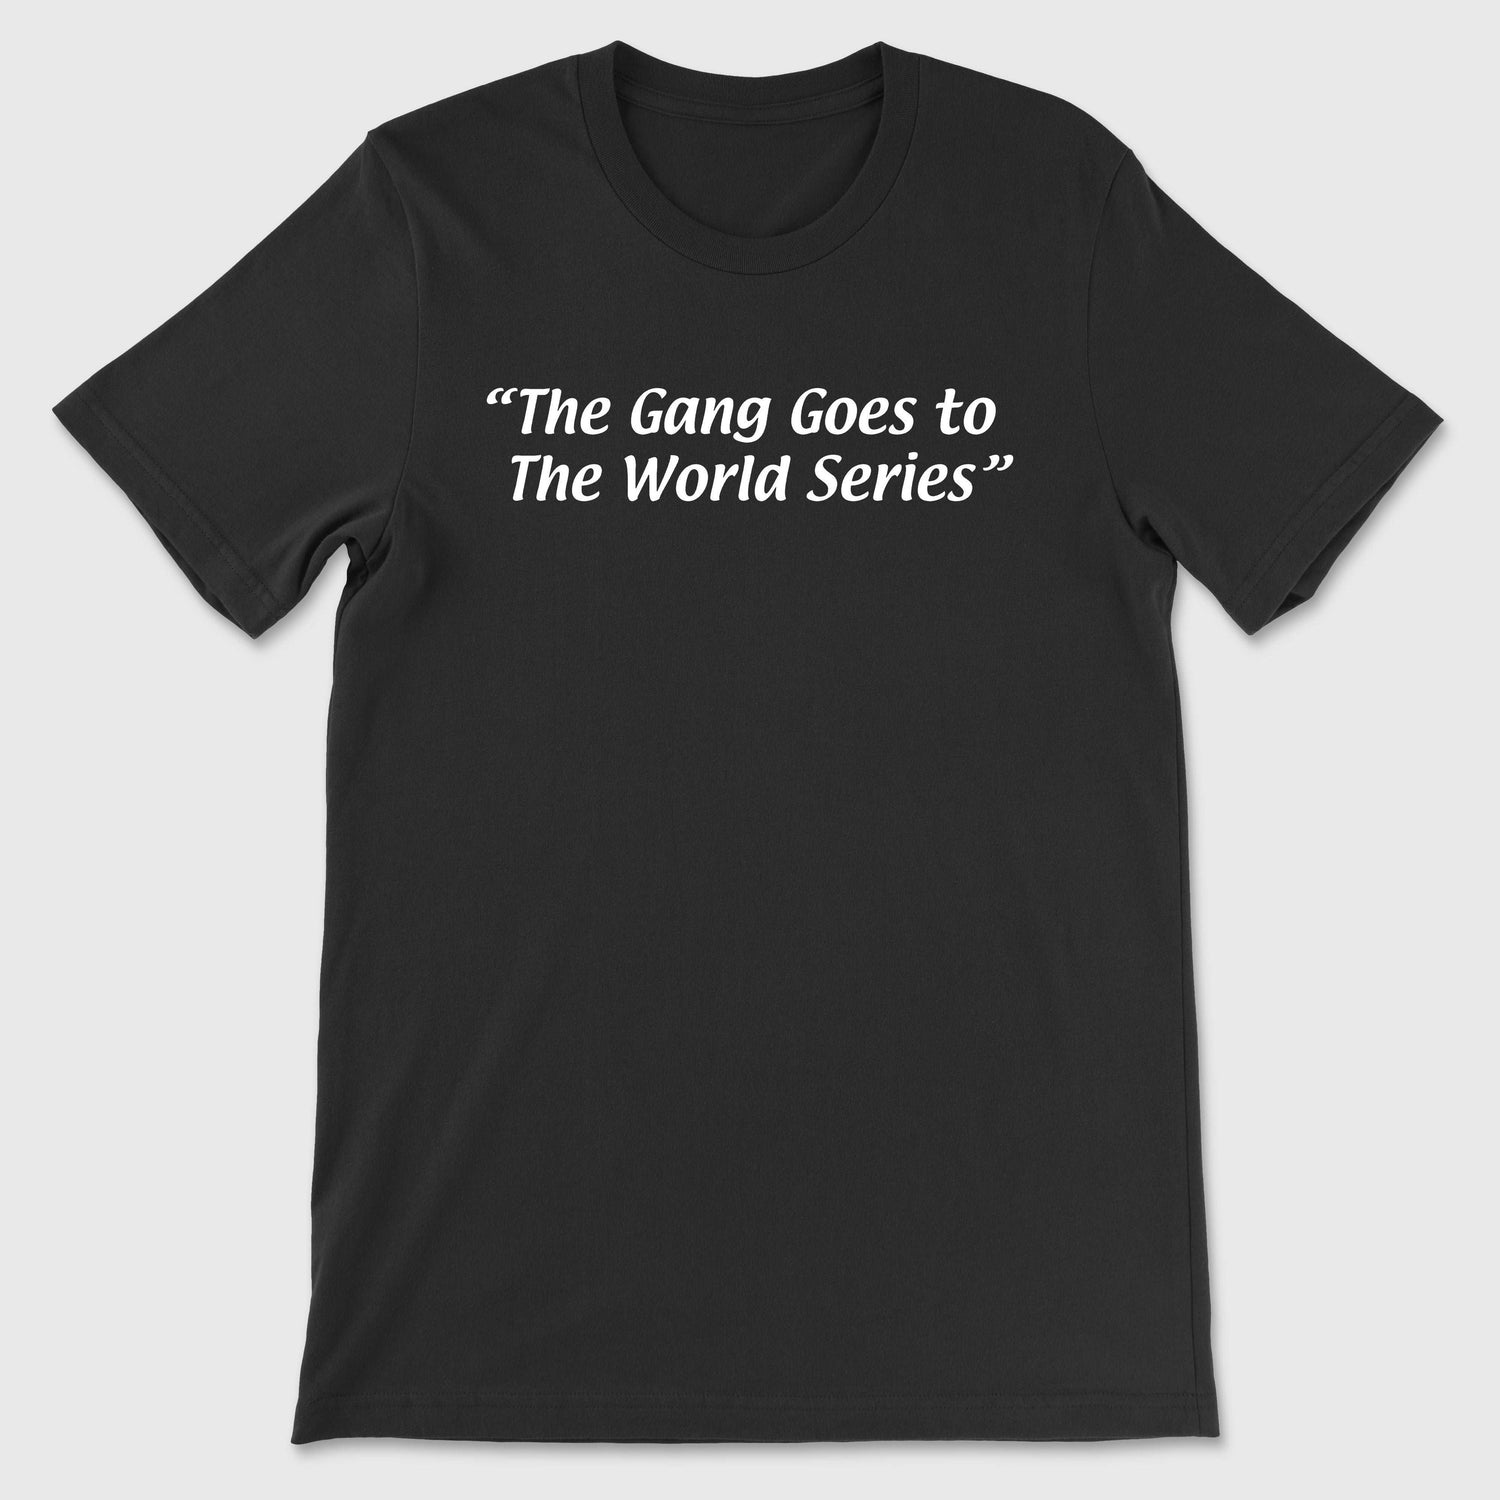 The Gang Goes to the World Series Tee